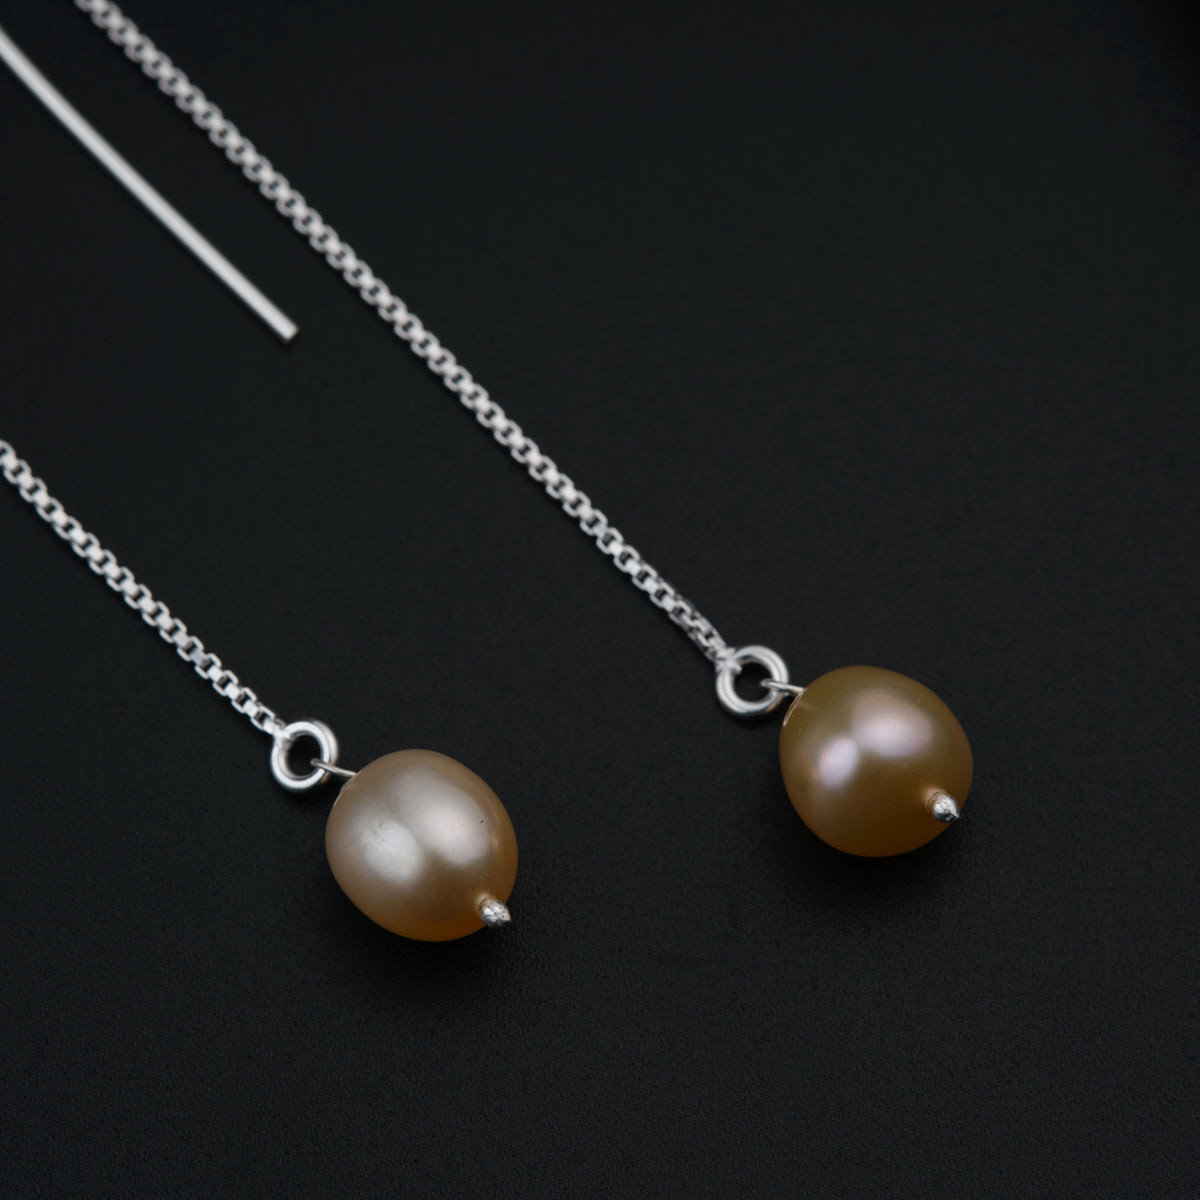 a pair of brown pearls on a silver chain